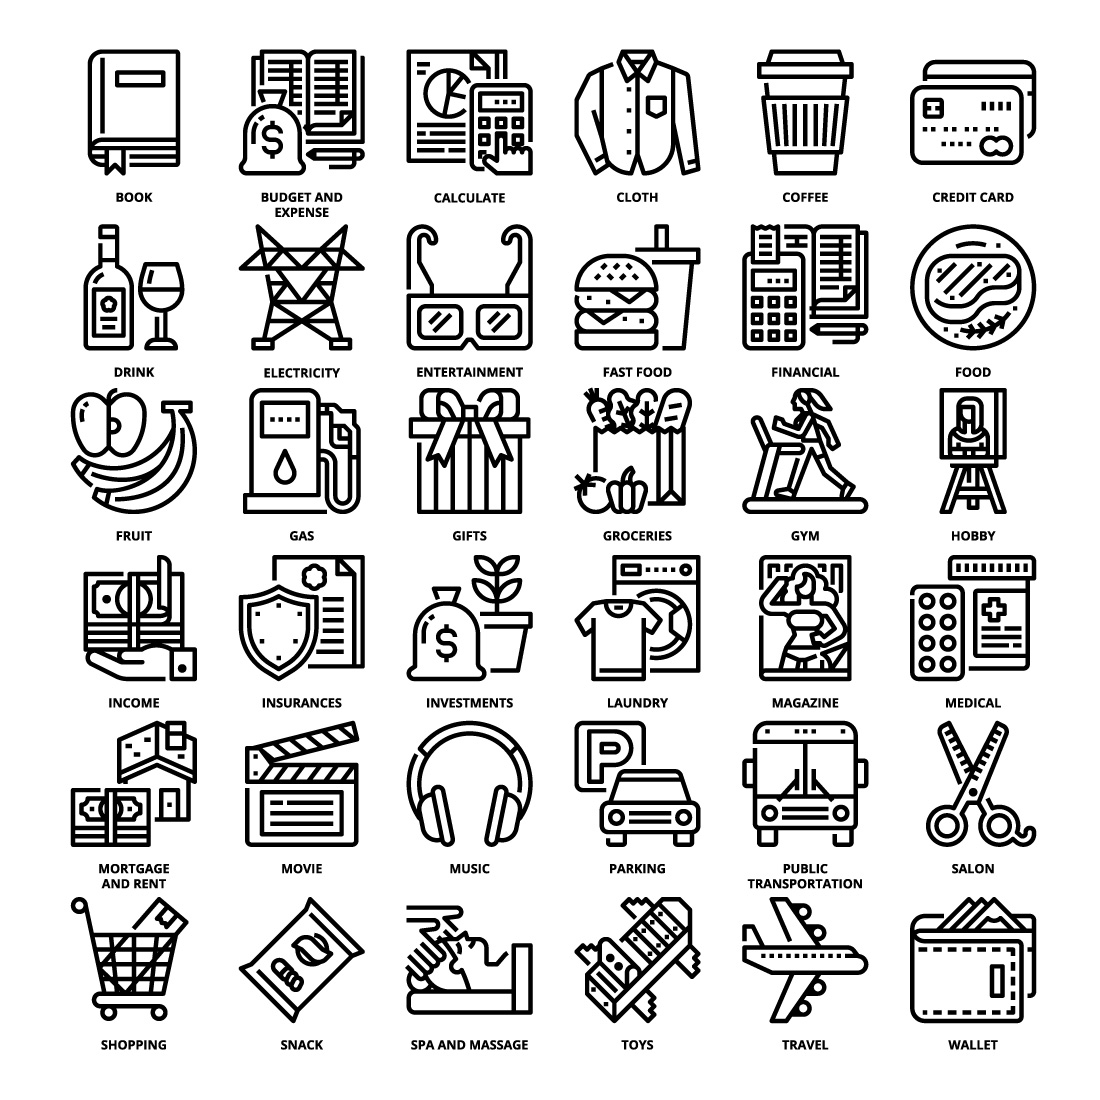 36 Budget and Expense Intelligence Icons Set x 4 Styles pinterest preview image.